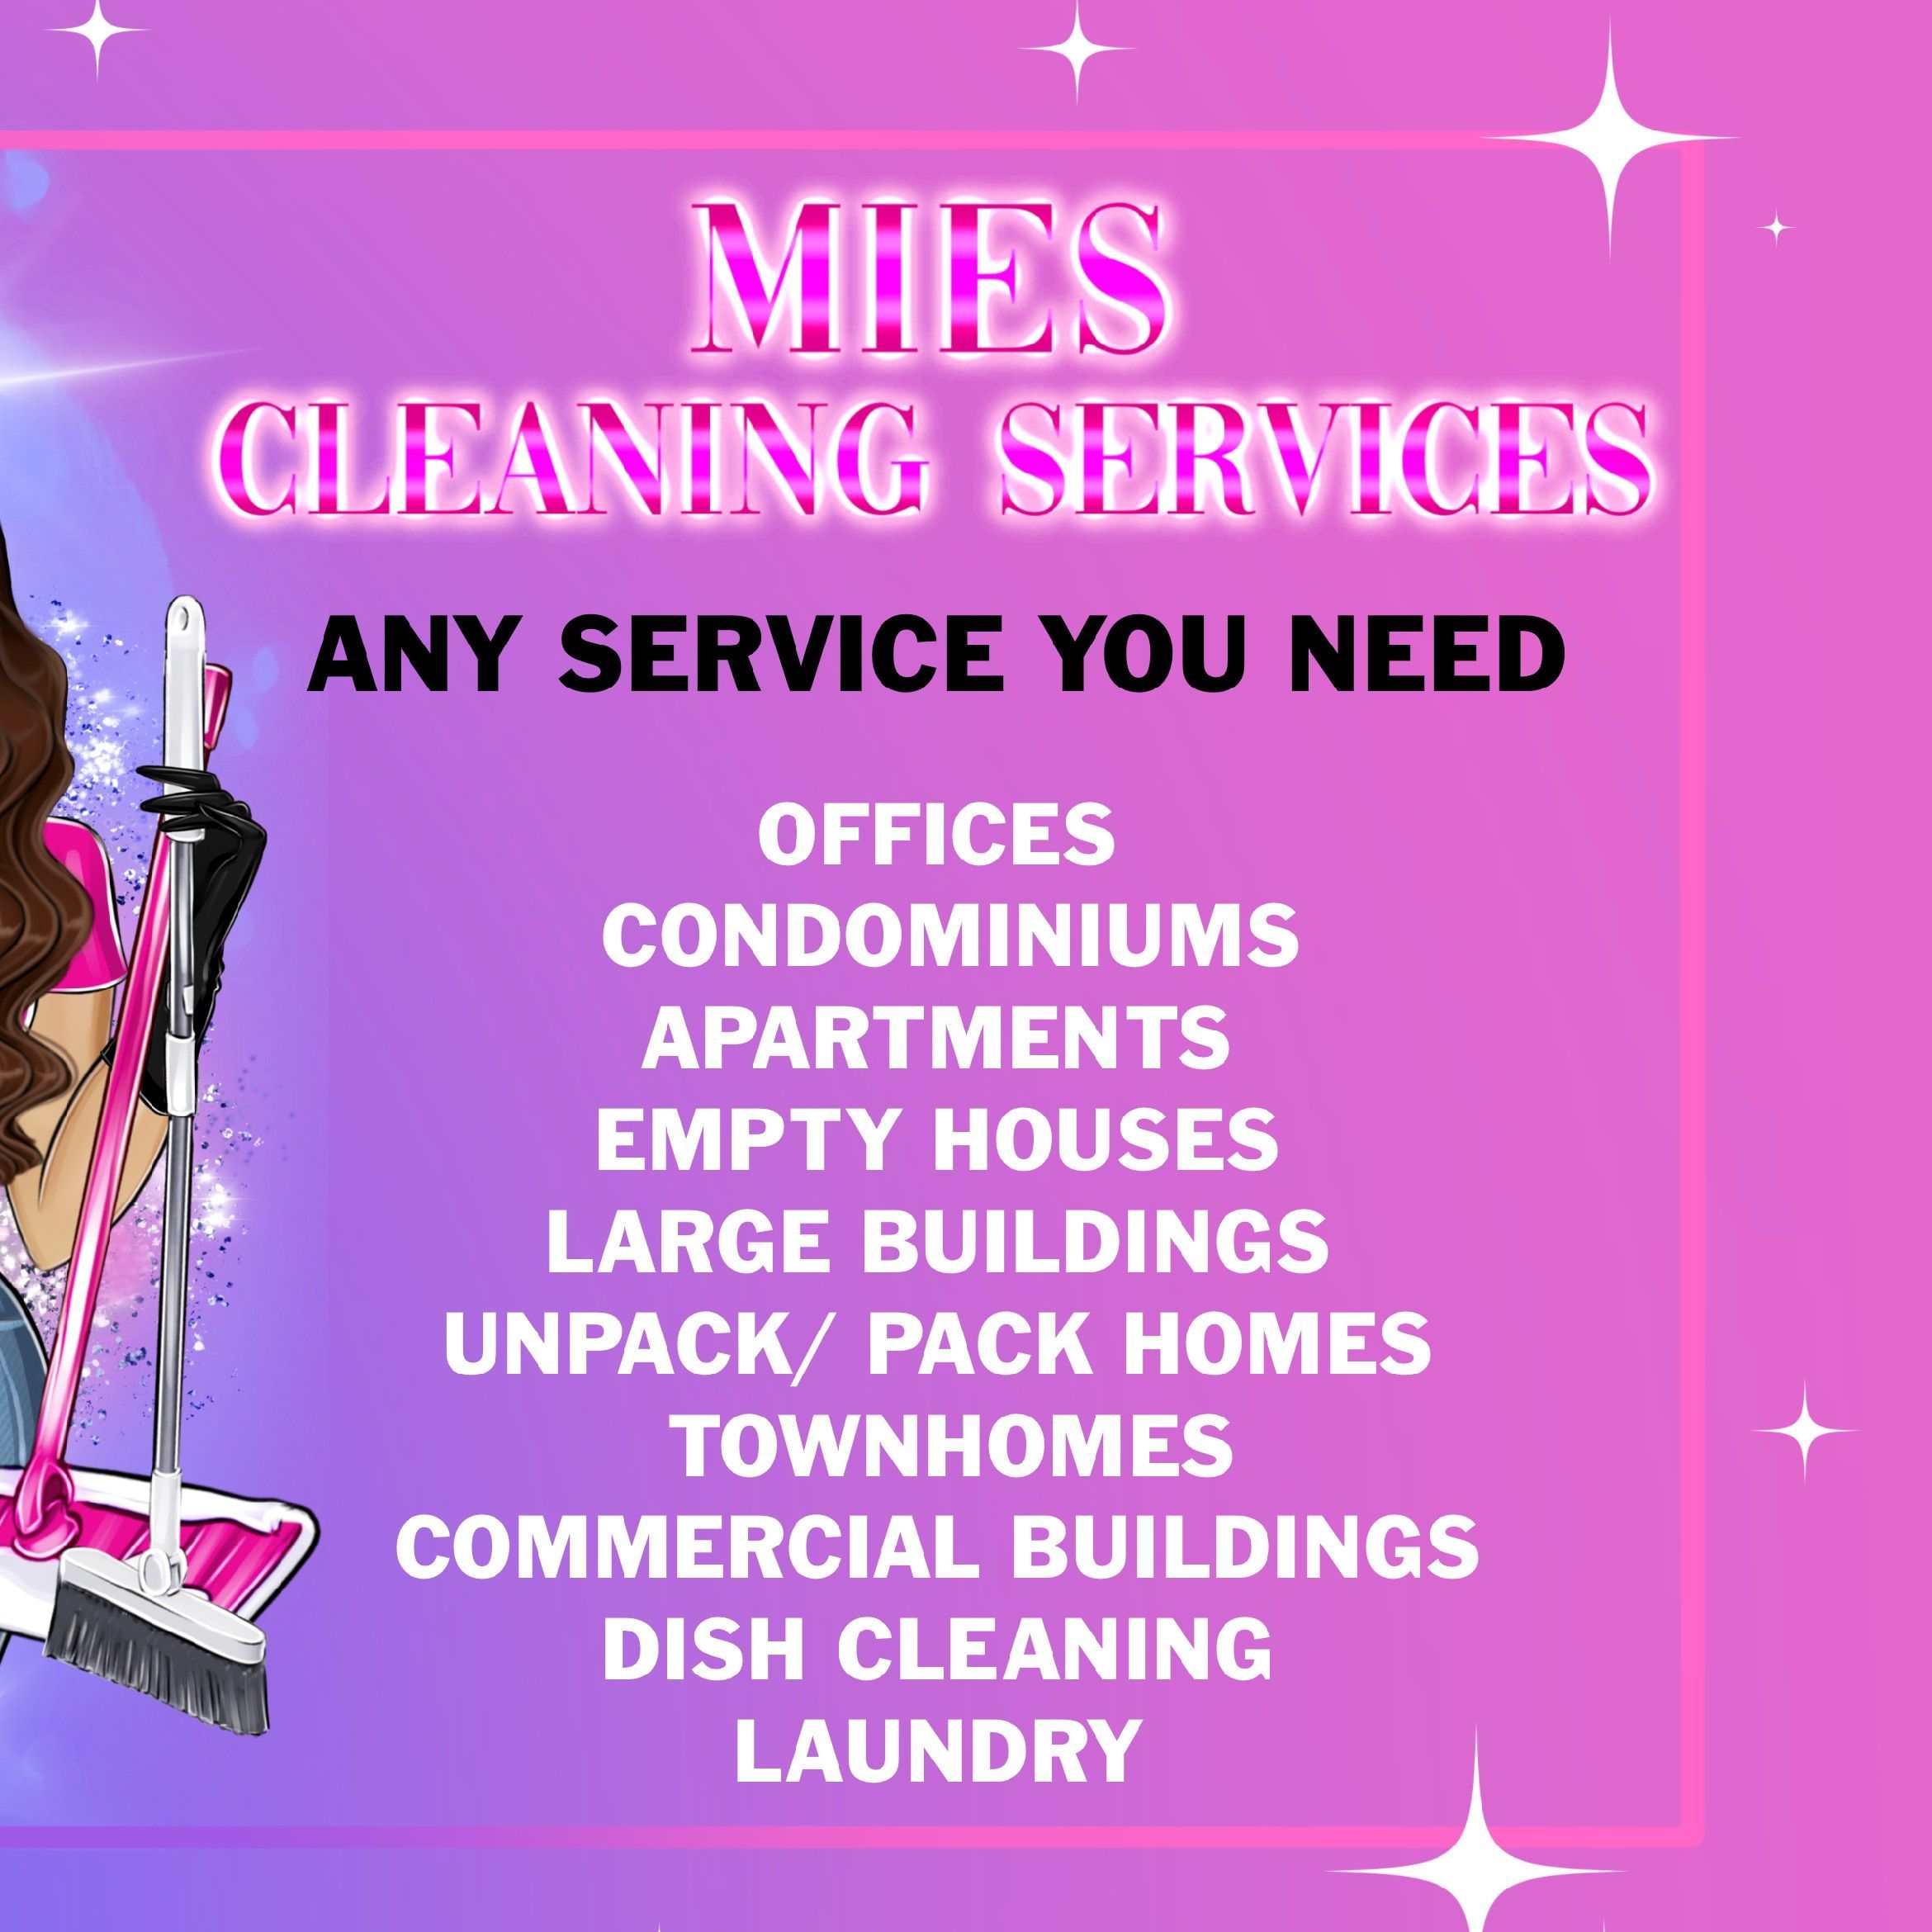 MIES CLEANING SERVICES, Aurora, 80011